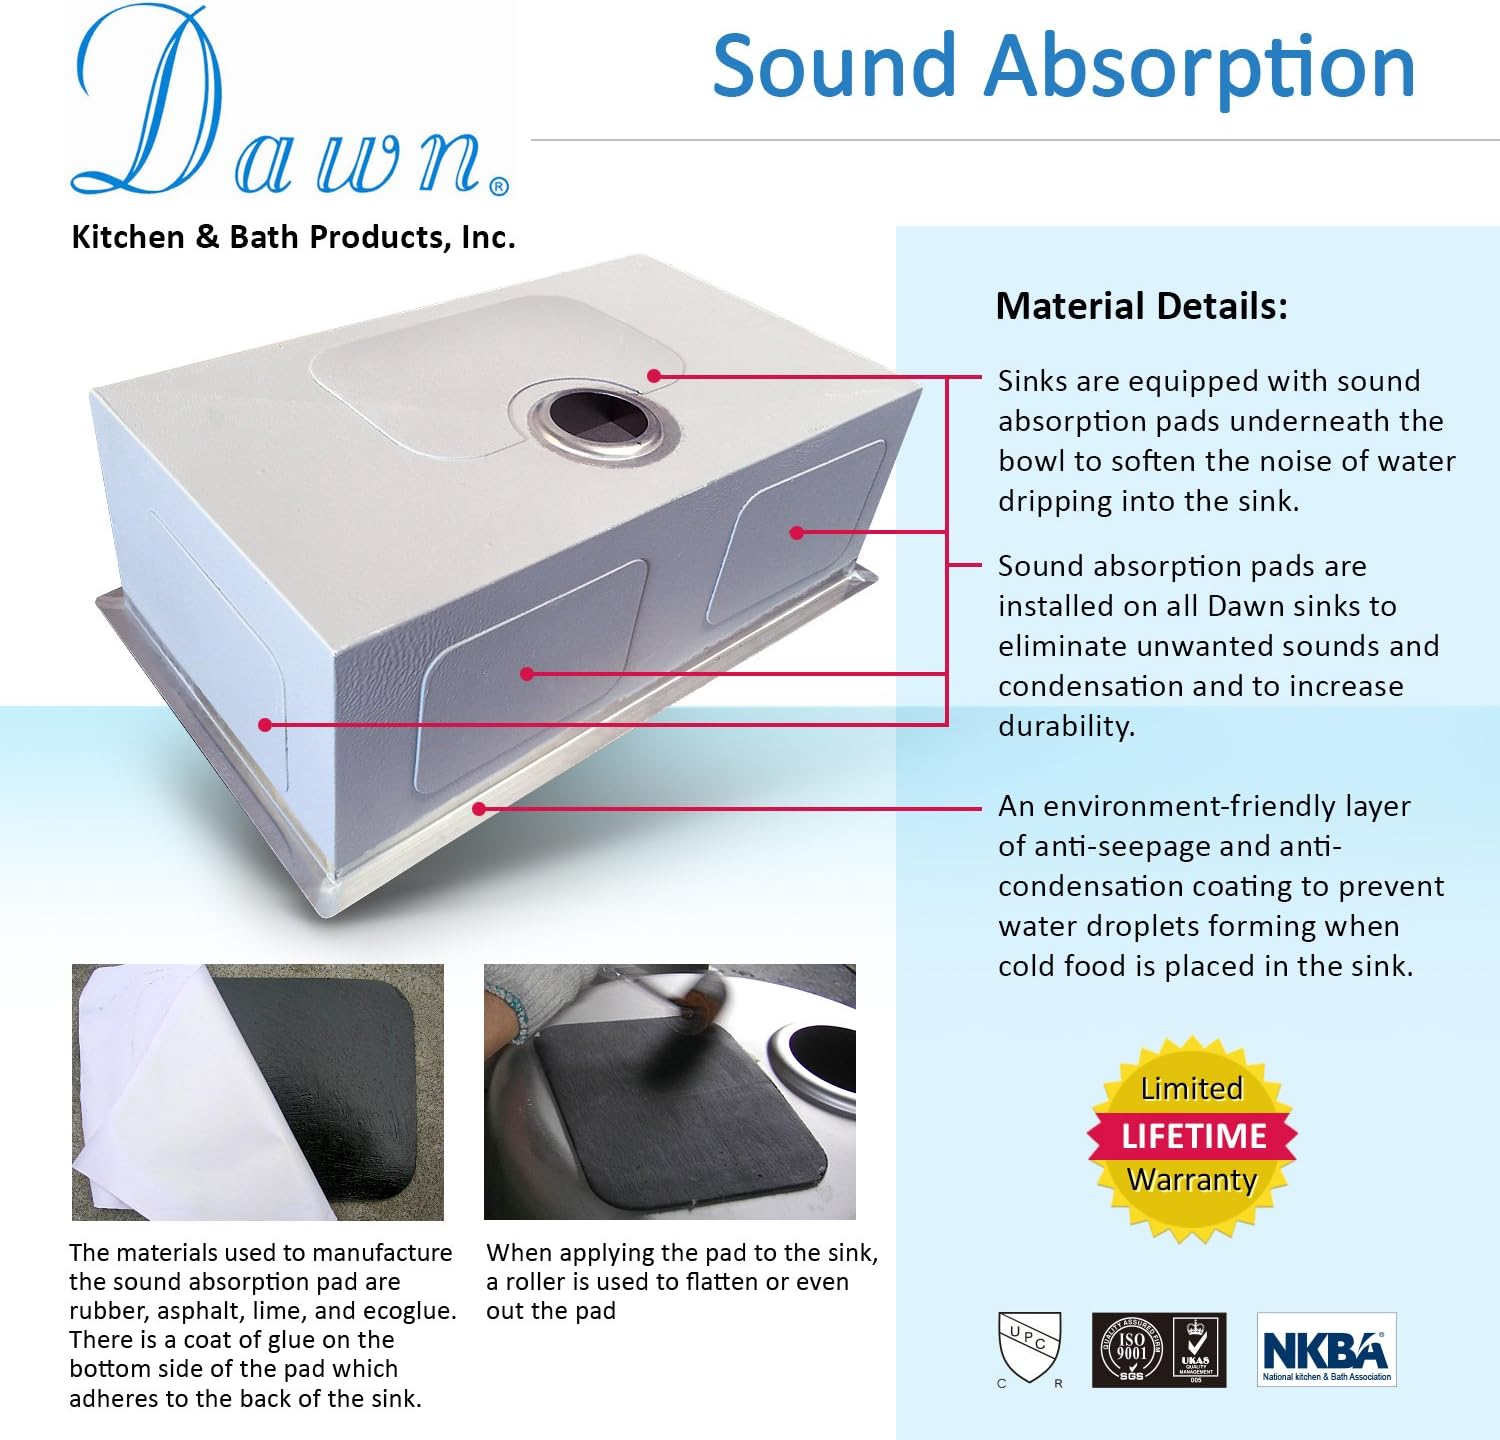 Dawn Kitchen & Bath Products material details of sound absorbent pads for their stainless steel sinks